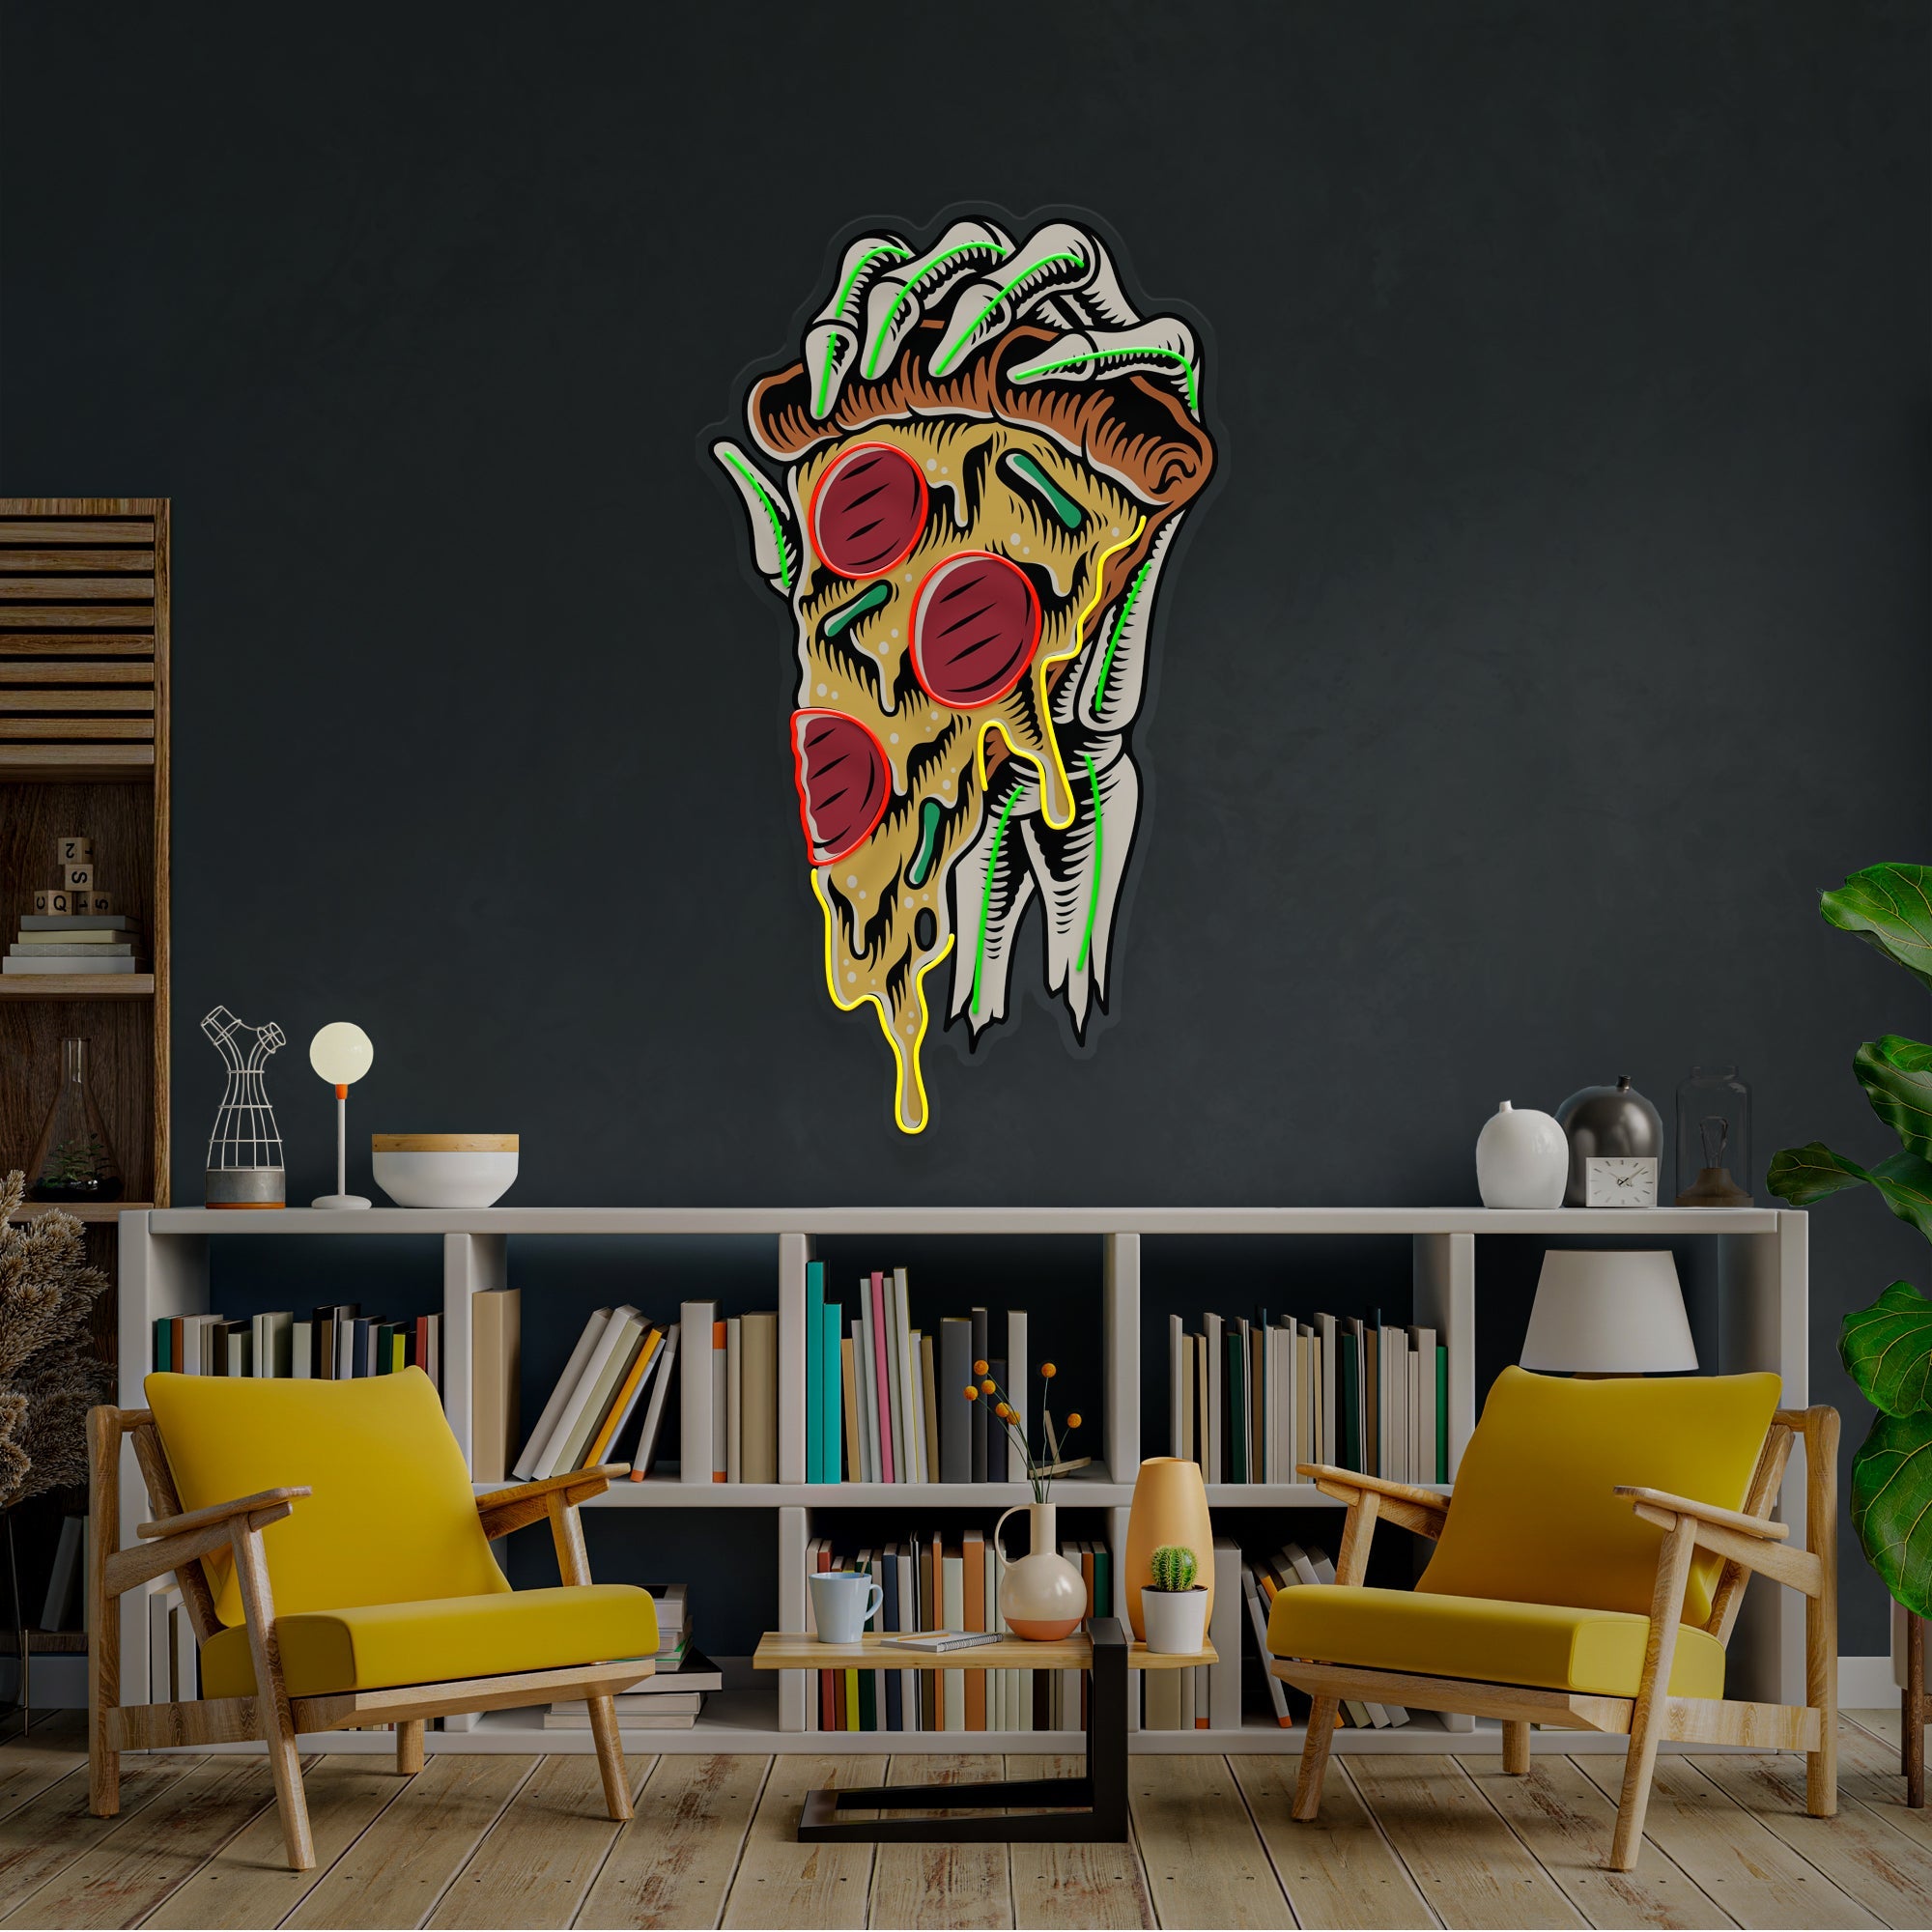 Pop Art Hand With A Slice Of Pizza Artwork Led Neon Sign Light - Neonbir